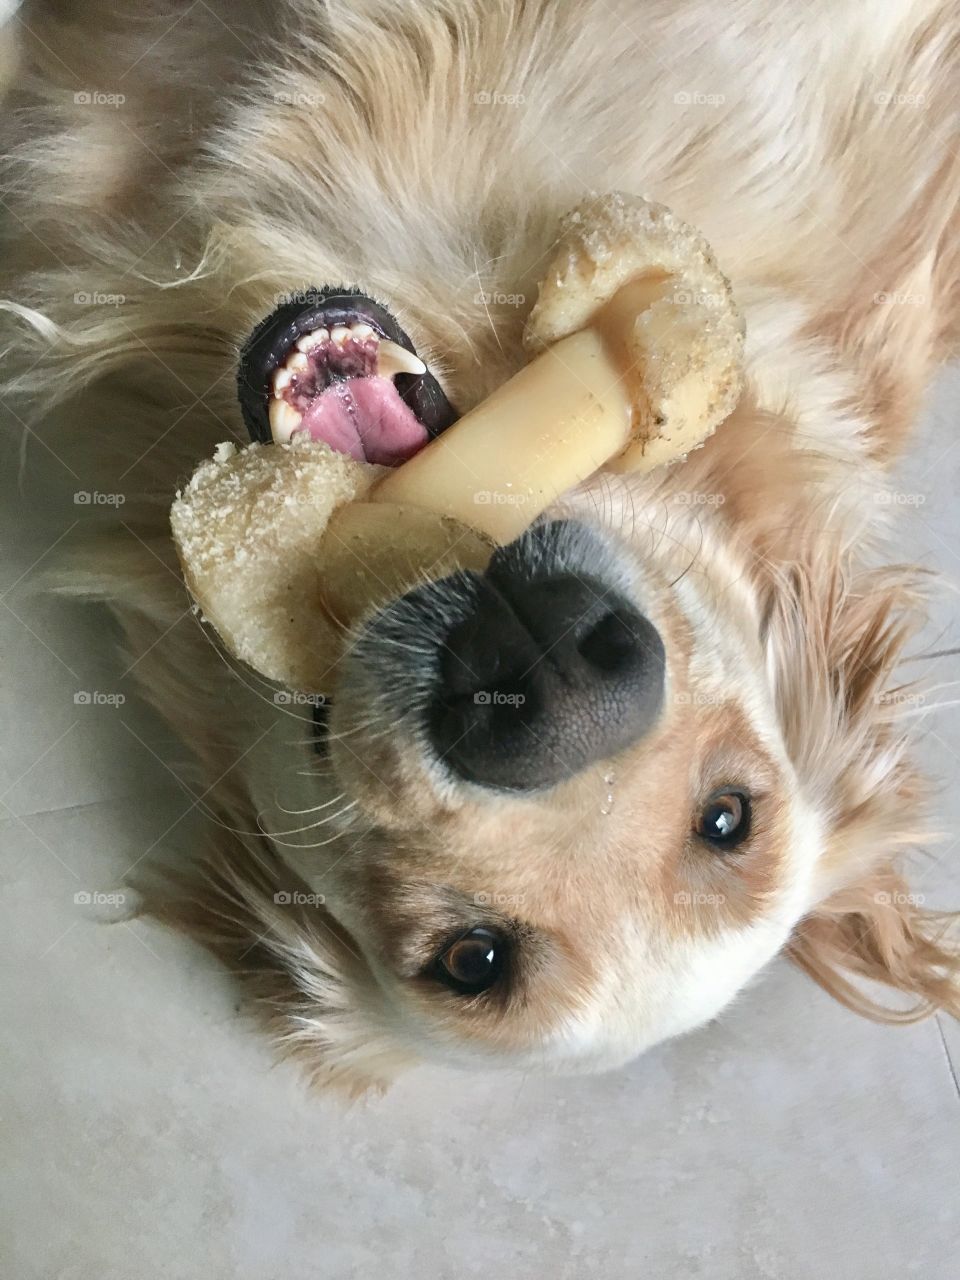 Chew dog toy and playful golden retriever